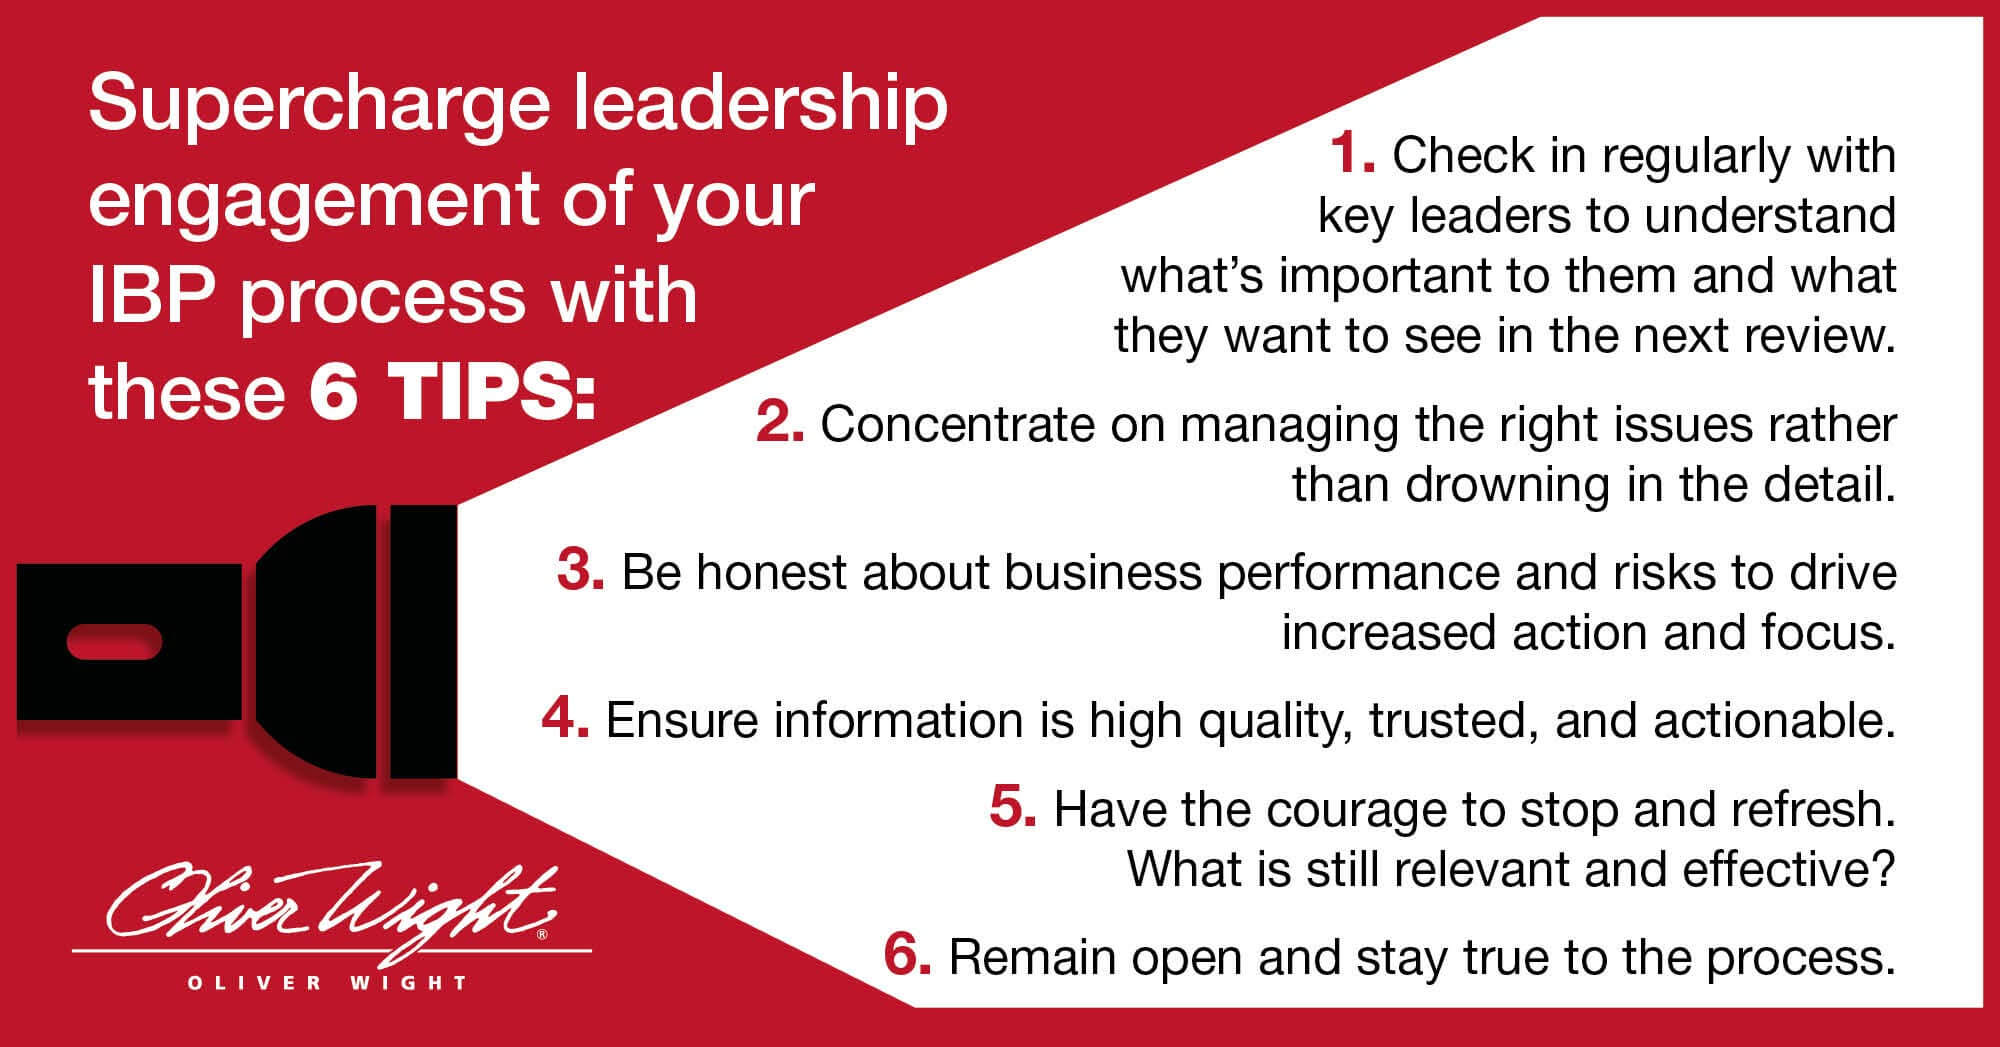 Supercharge leadership engagement of your IBP process with these 6 tips: